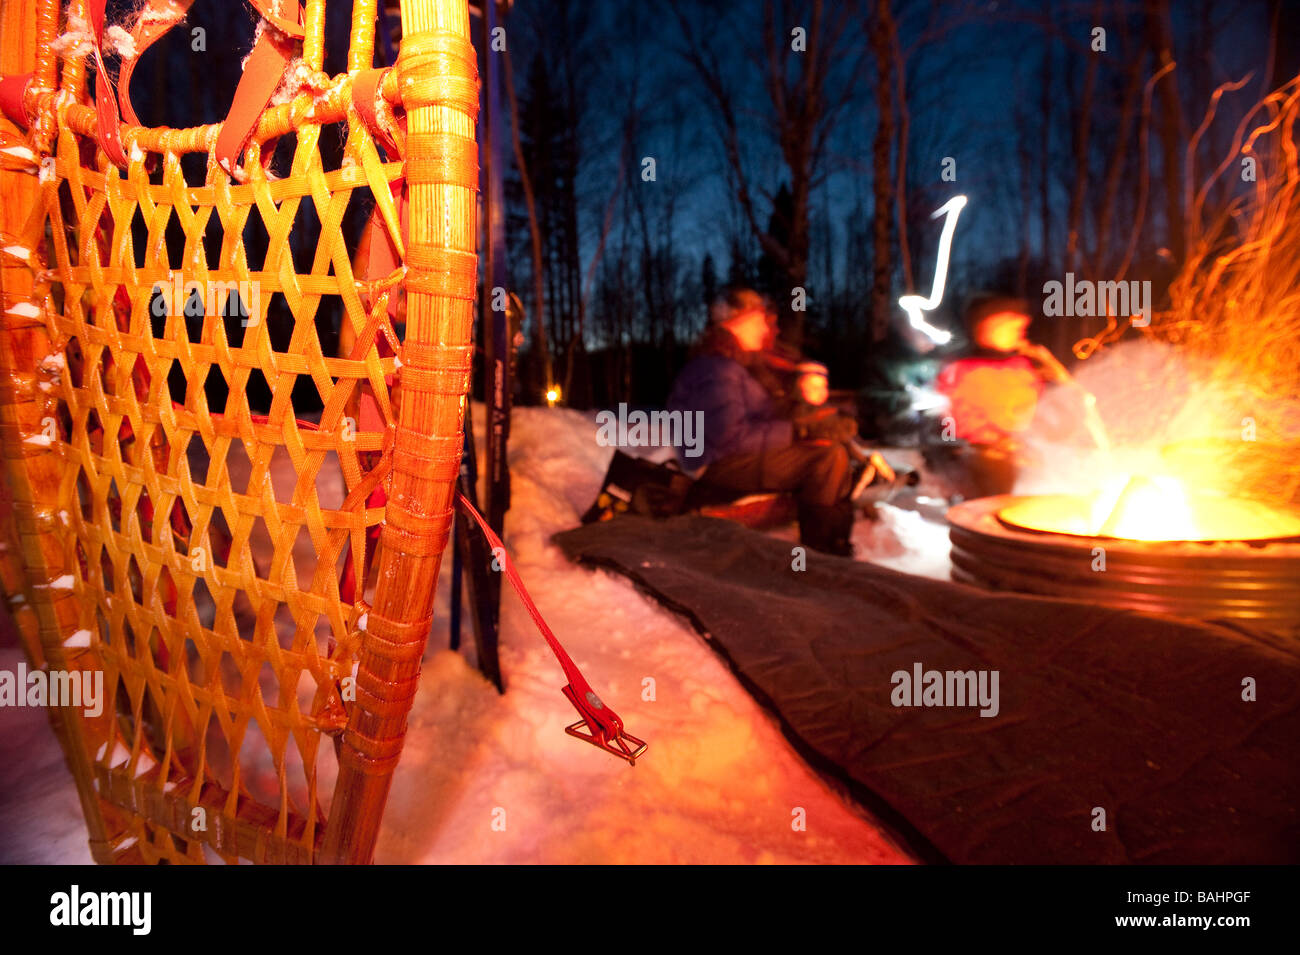 PEOPLE TAKE A BREAK FROM NIGHT SKIING AND SNOWSHOEING TO WARM UP NEXT TO A FIRE Stock Photo